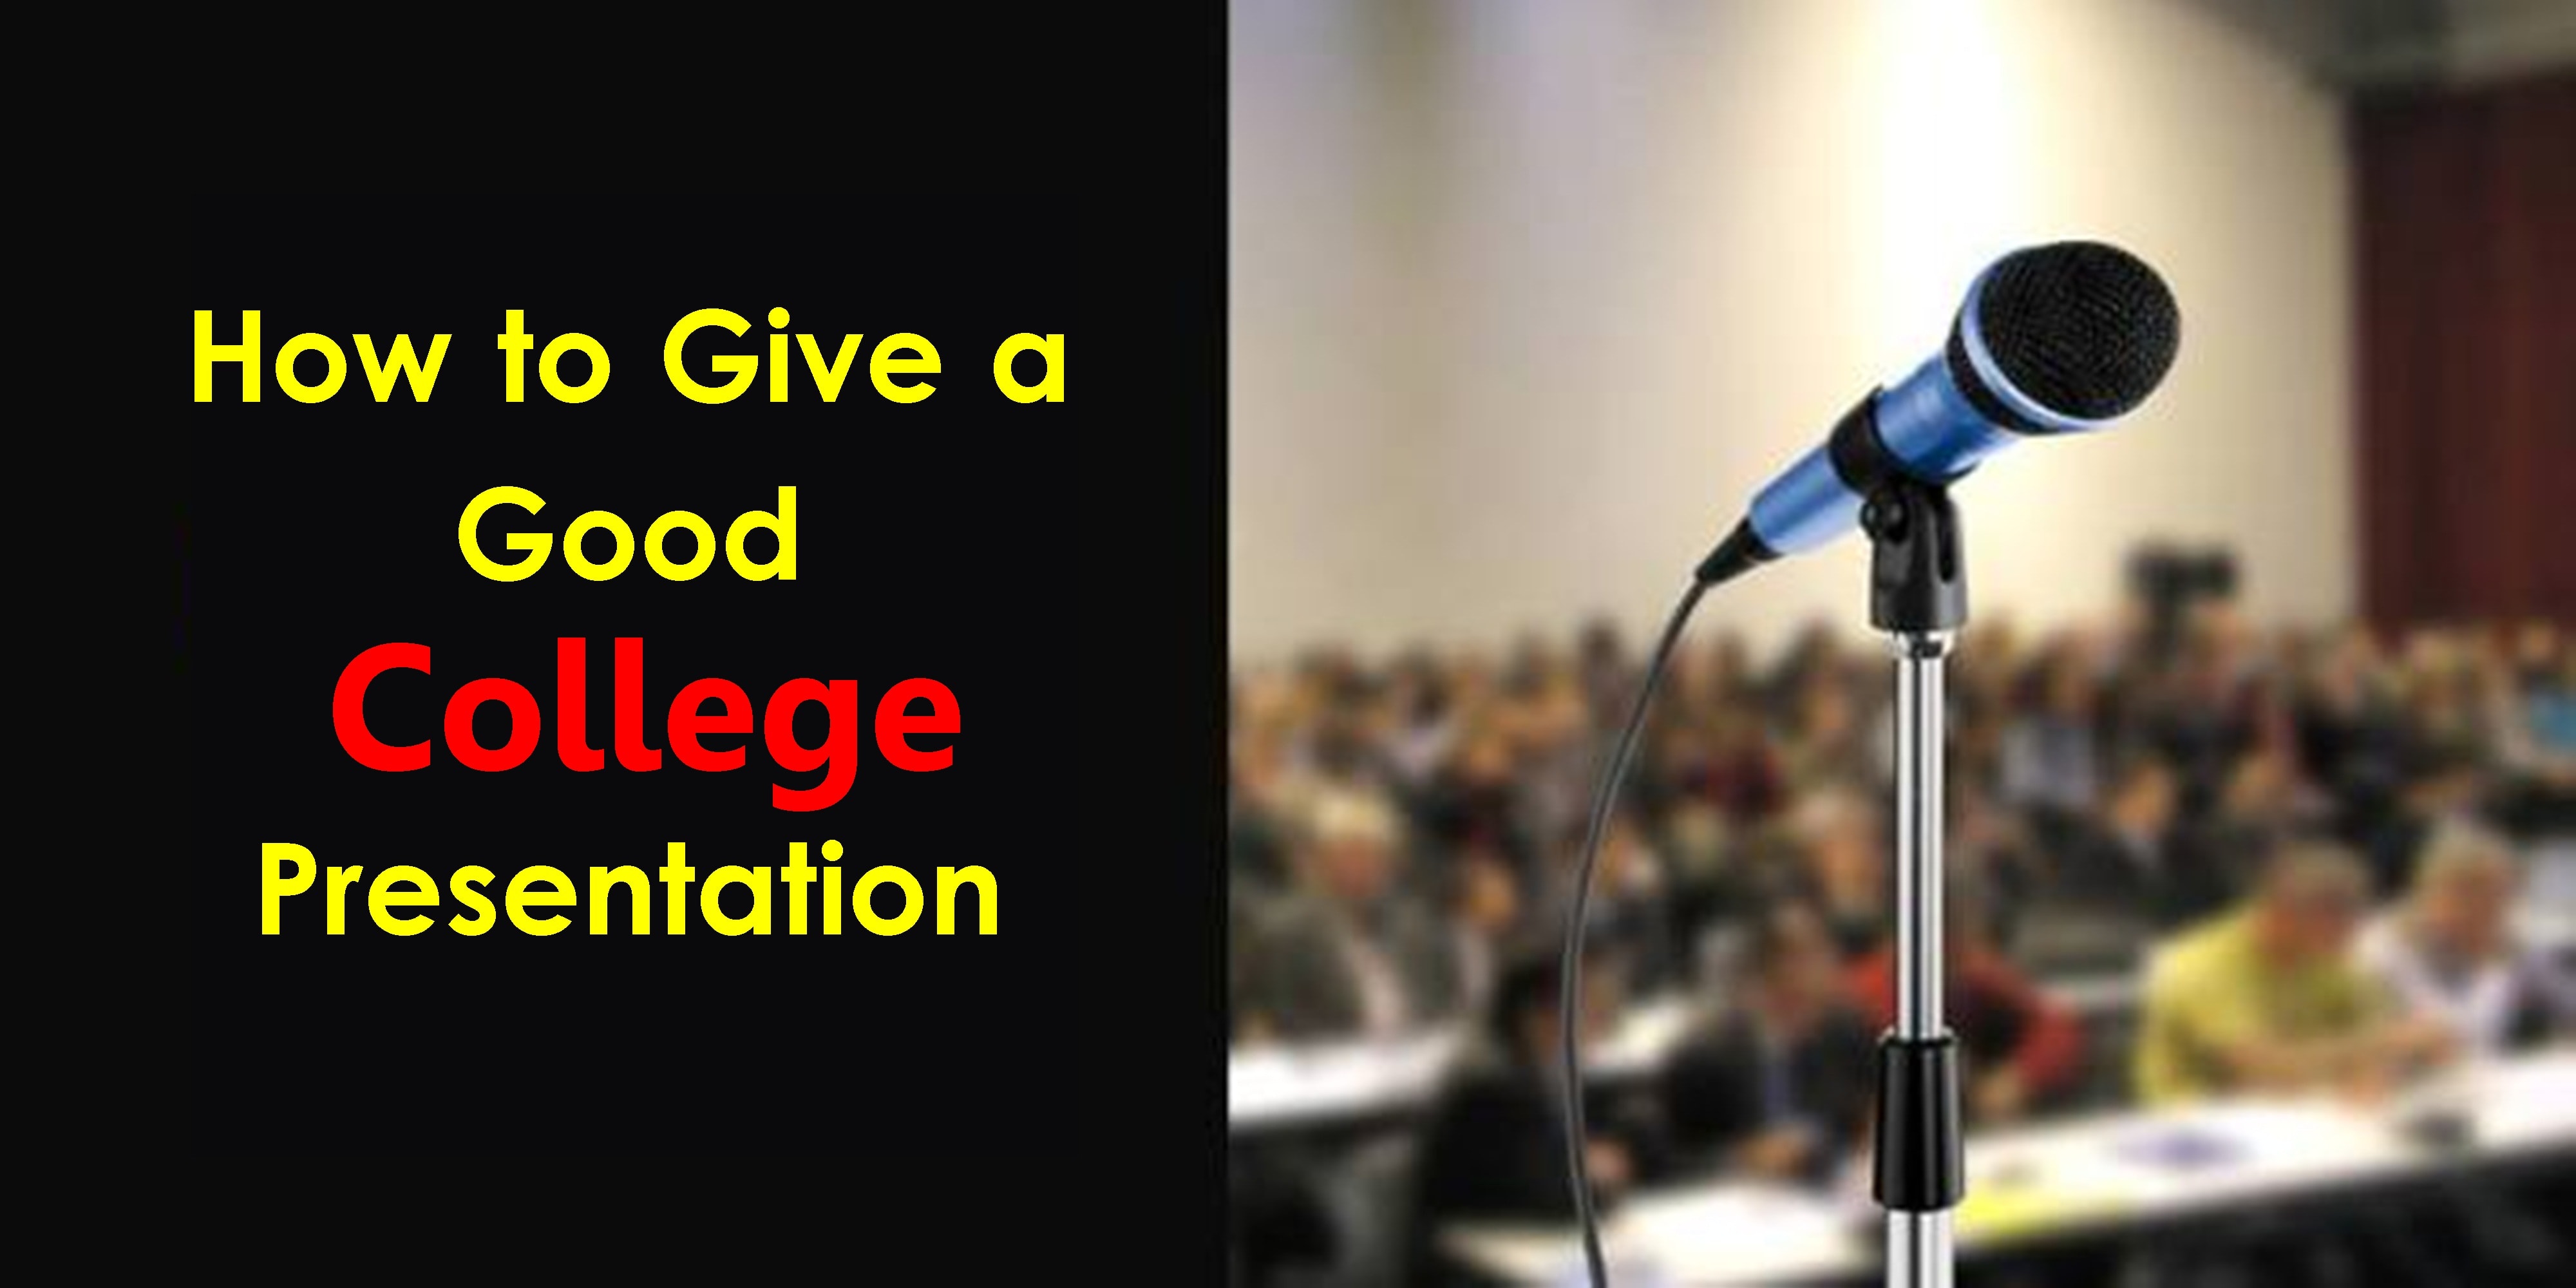 how to give a good presentation in college